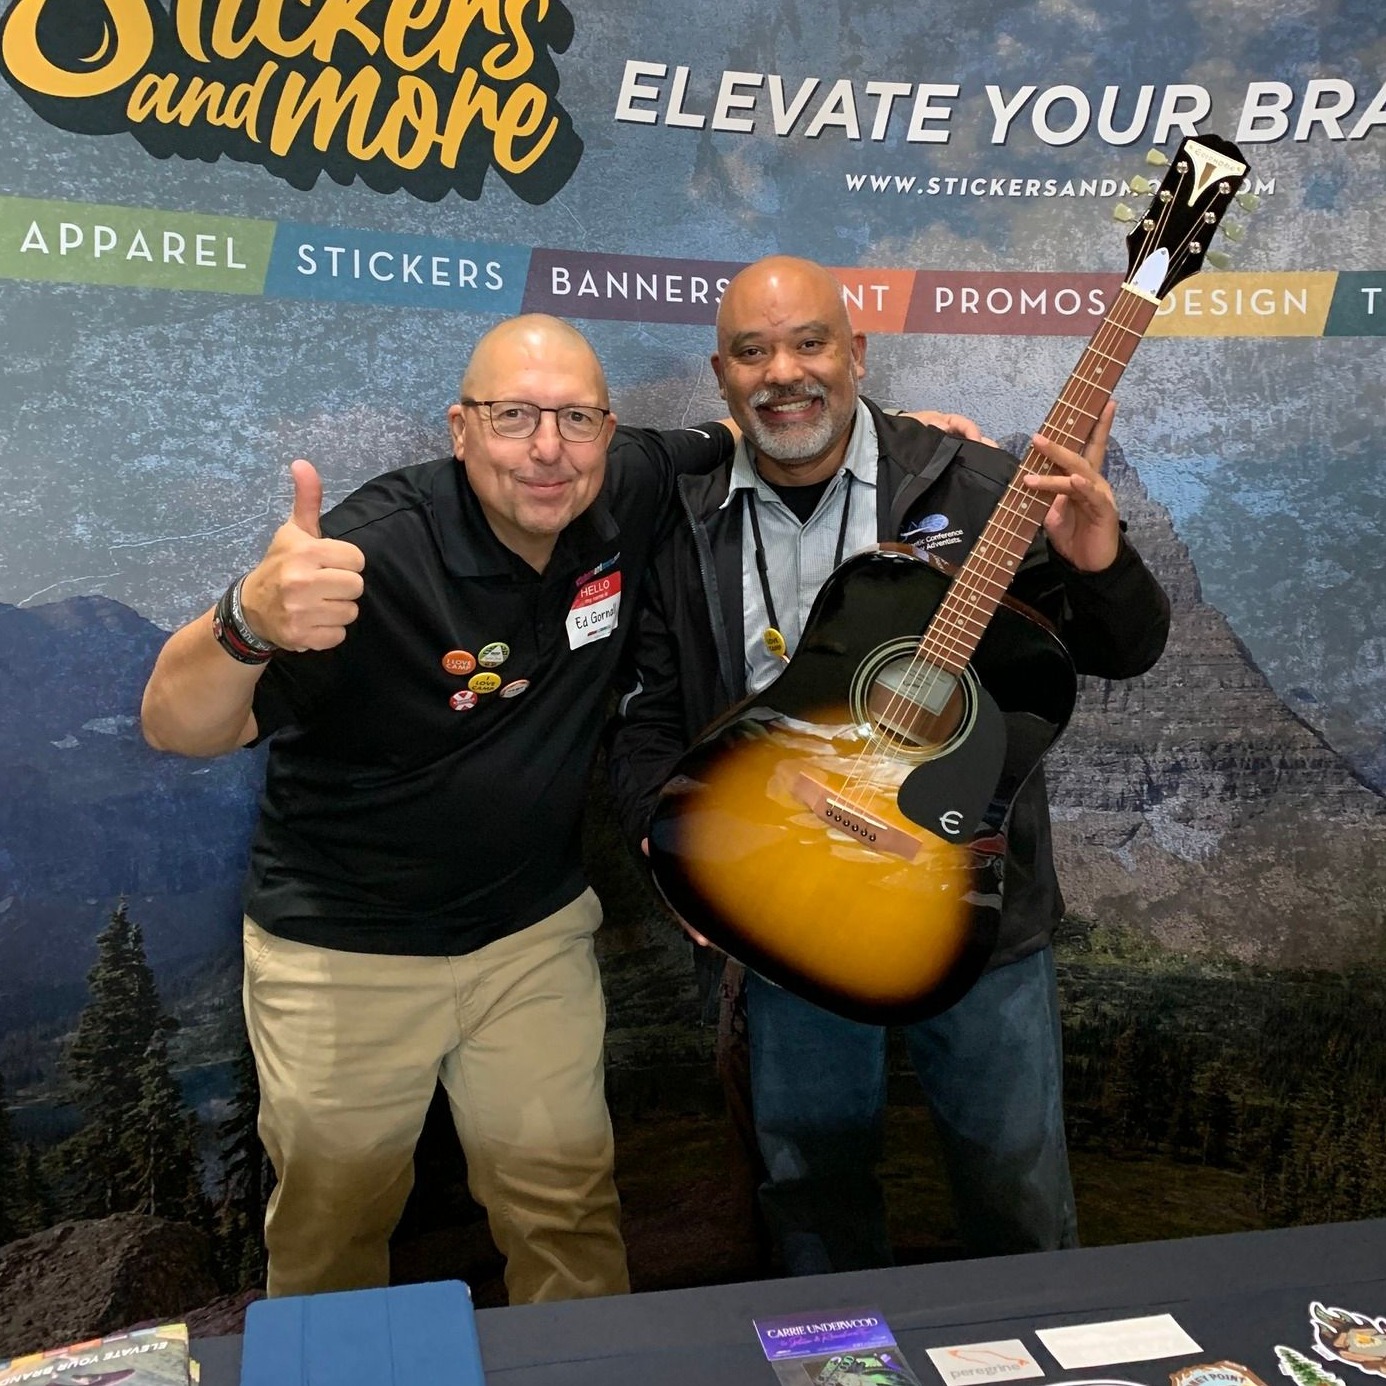 Congrats to John from River Oaks on winning the guitar at the AACP convention. Let us help you elevate your brand. Check out our website and see how we can help.
https://stickersandmore.com/
John Newlove #ChurchInAction #churchin #youthpastors #winnerswin #winner #guitar